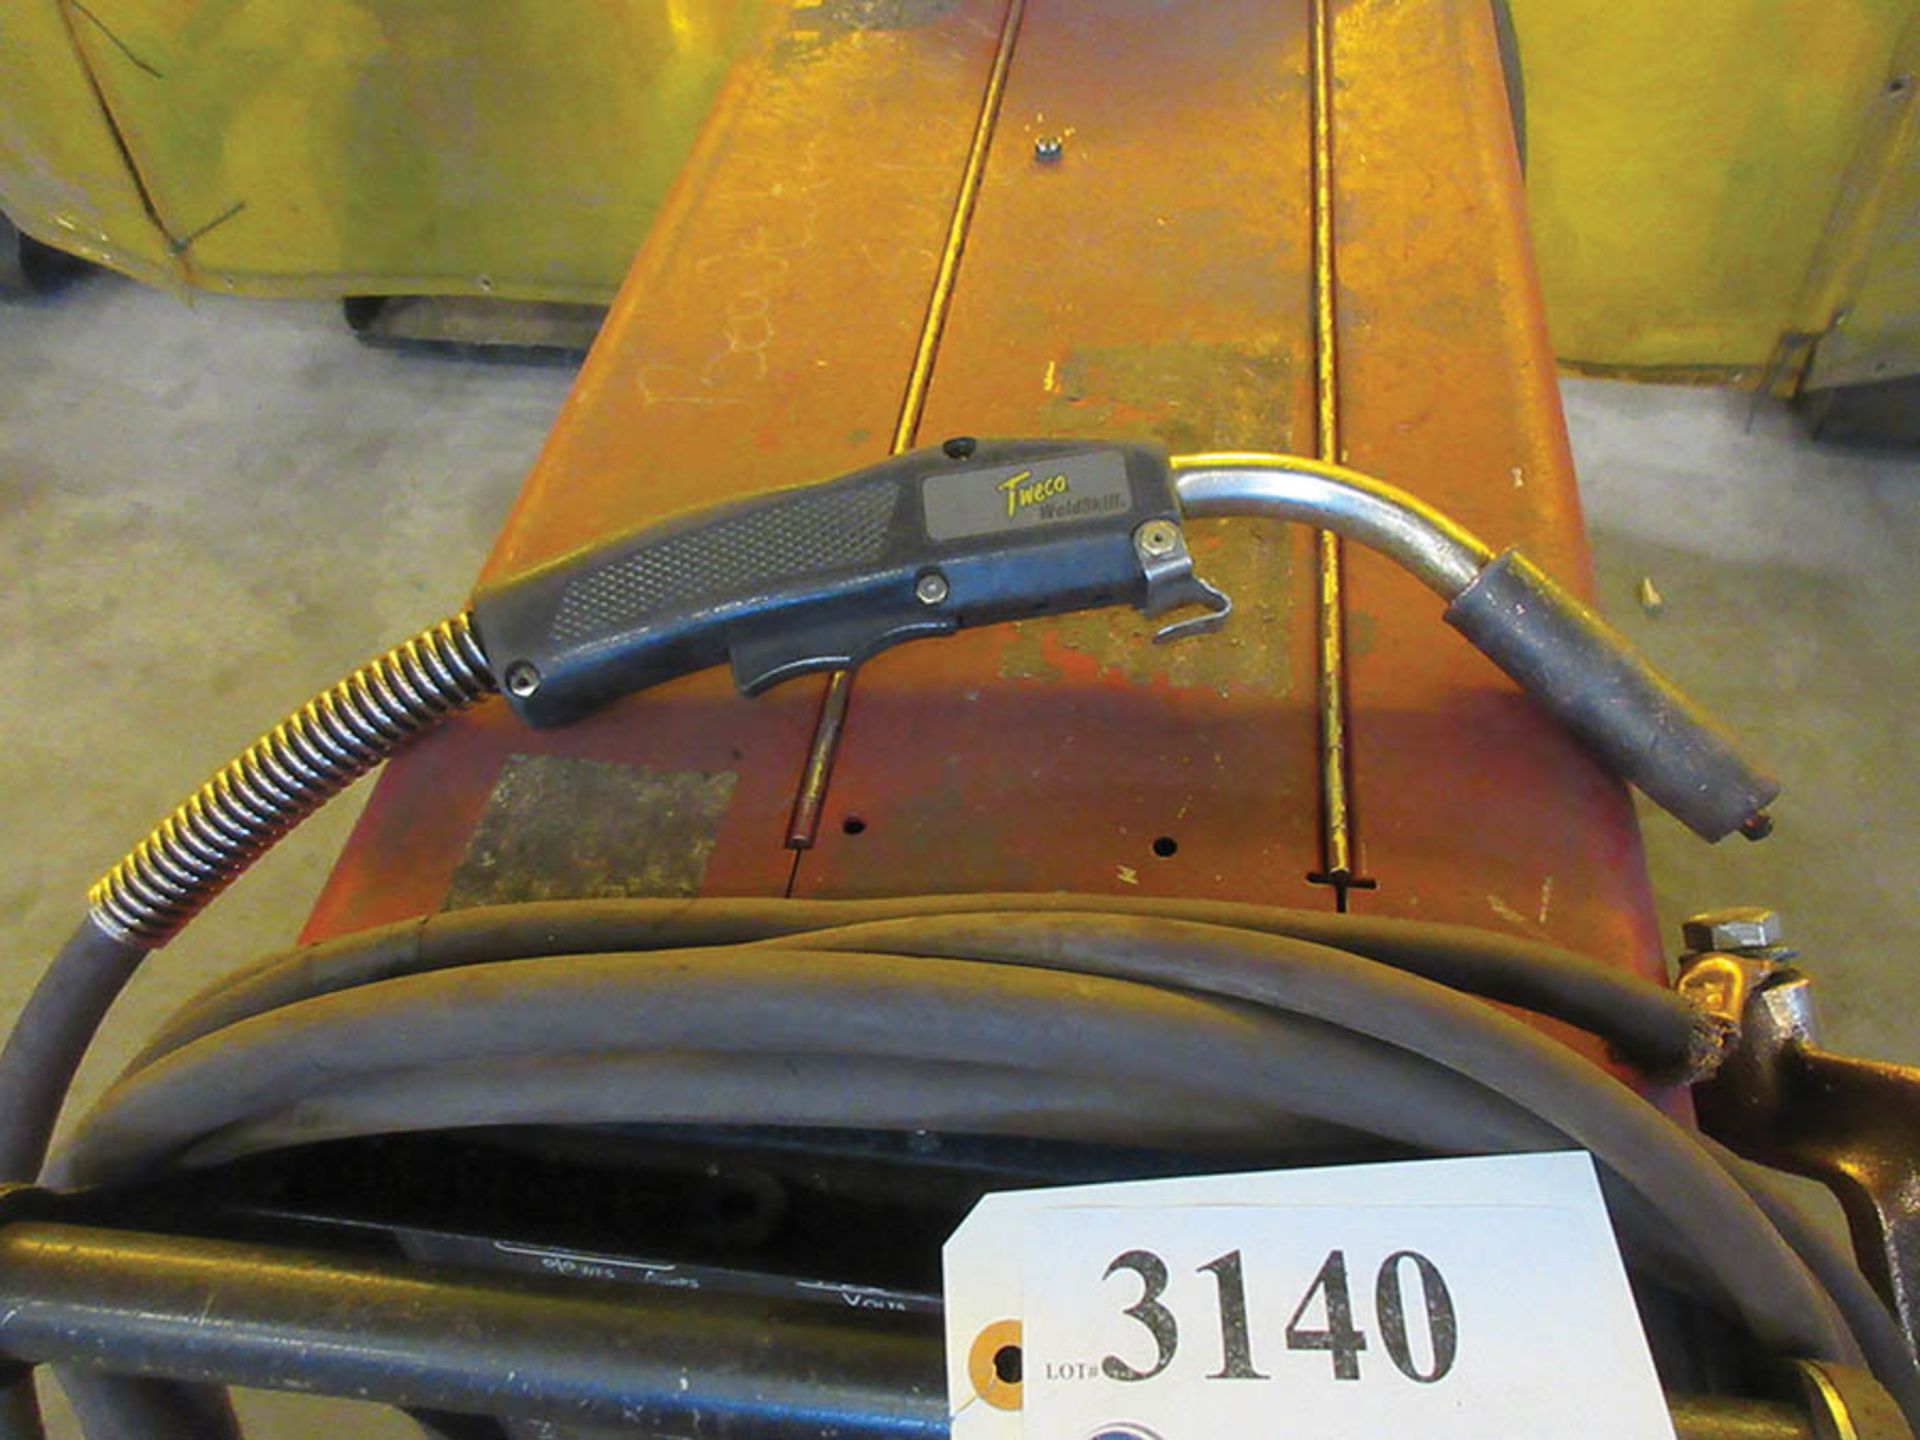 LINCOLN ELECTRIC 350MP POWER MIG WELDER WITH TWECO WELDSKILL MIG GUN, #6 - Image 3 of 3